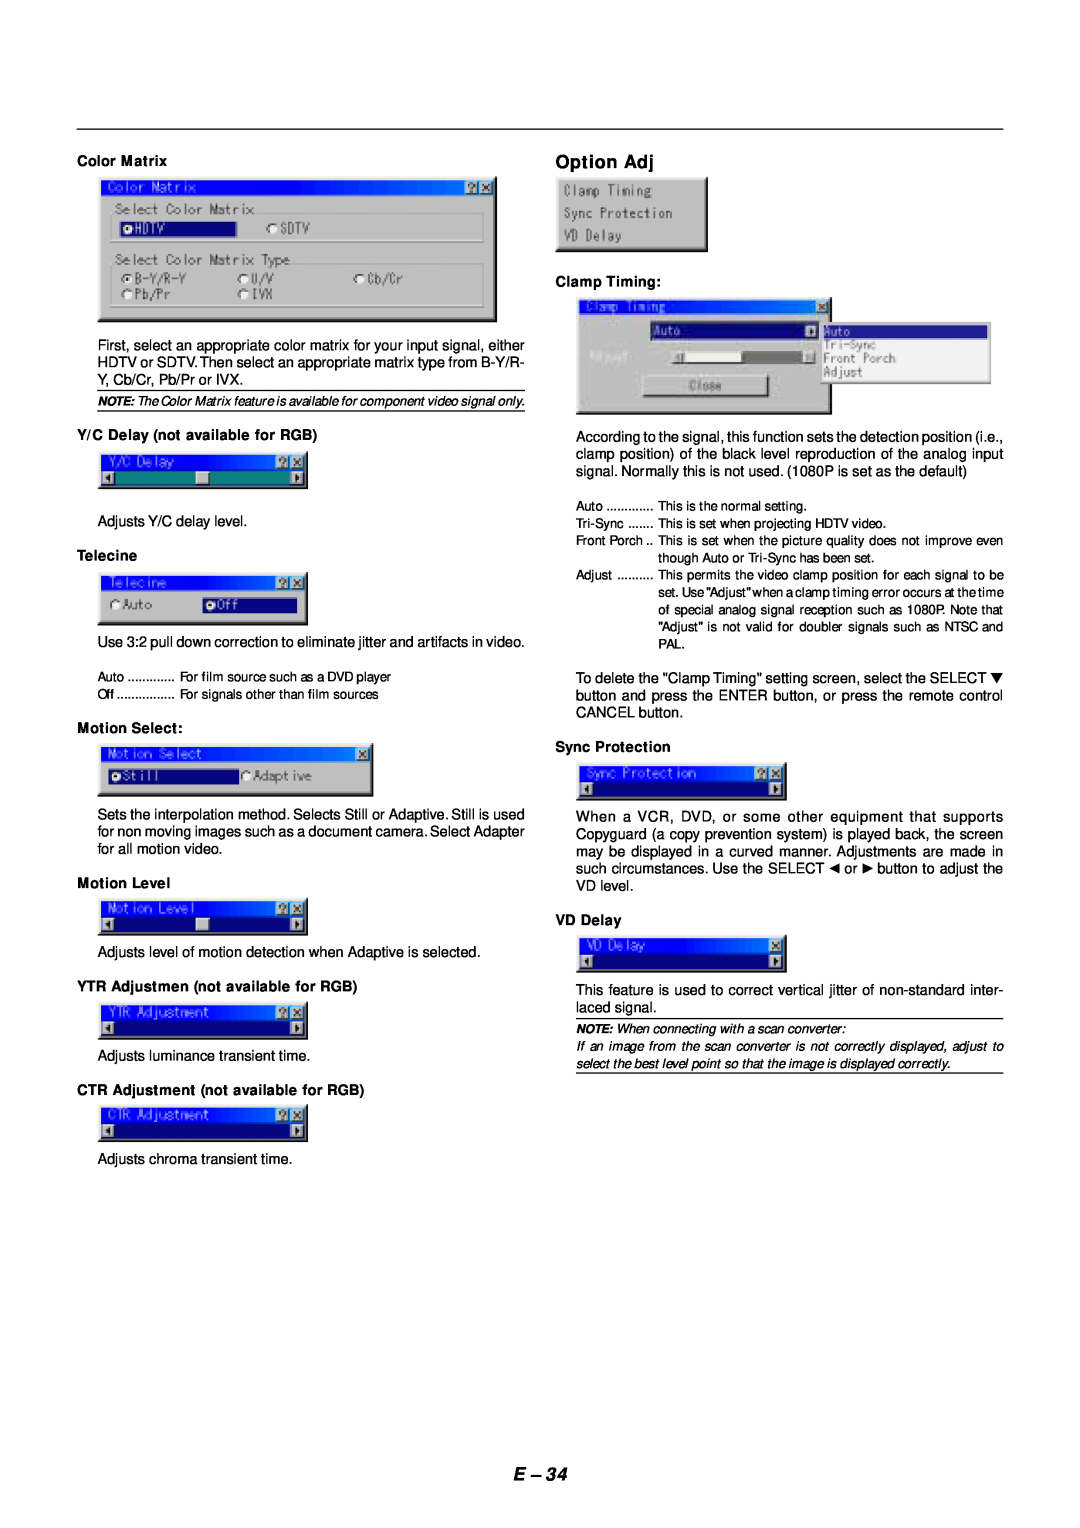 NEC SX4000 user manual Option Adj, NOTE When connecting with a scan converter 